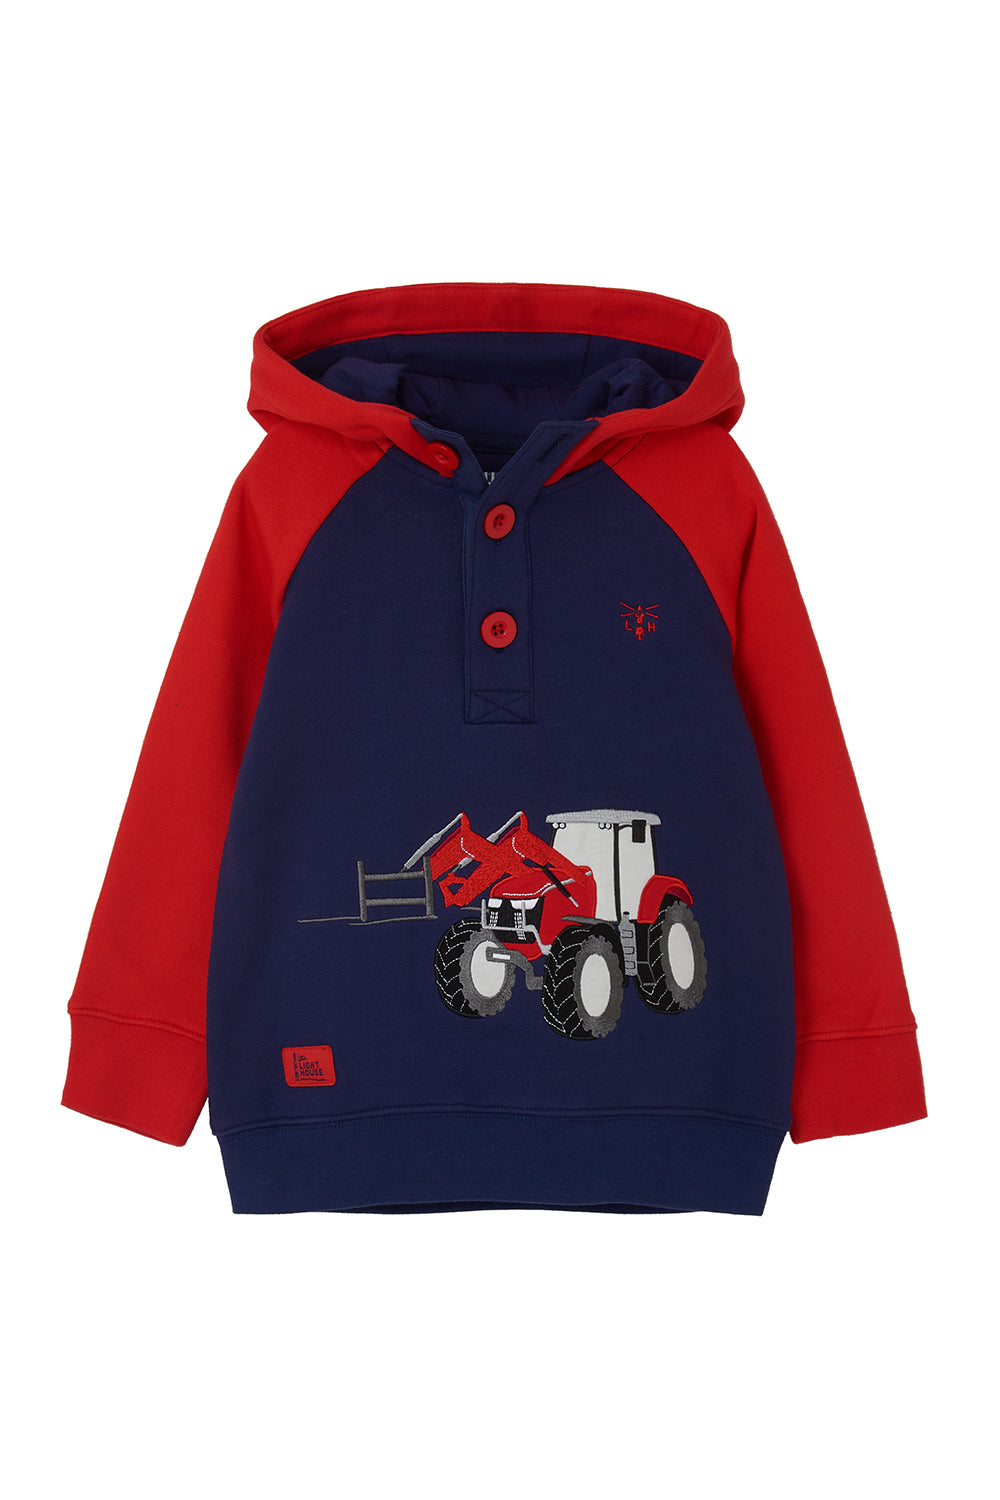 Lighthouse Jack Boys Sweat - Red Frontloader